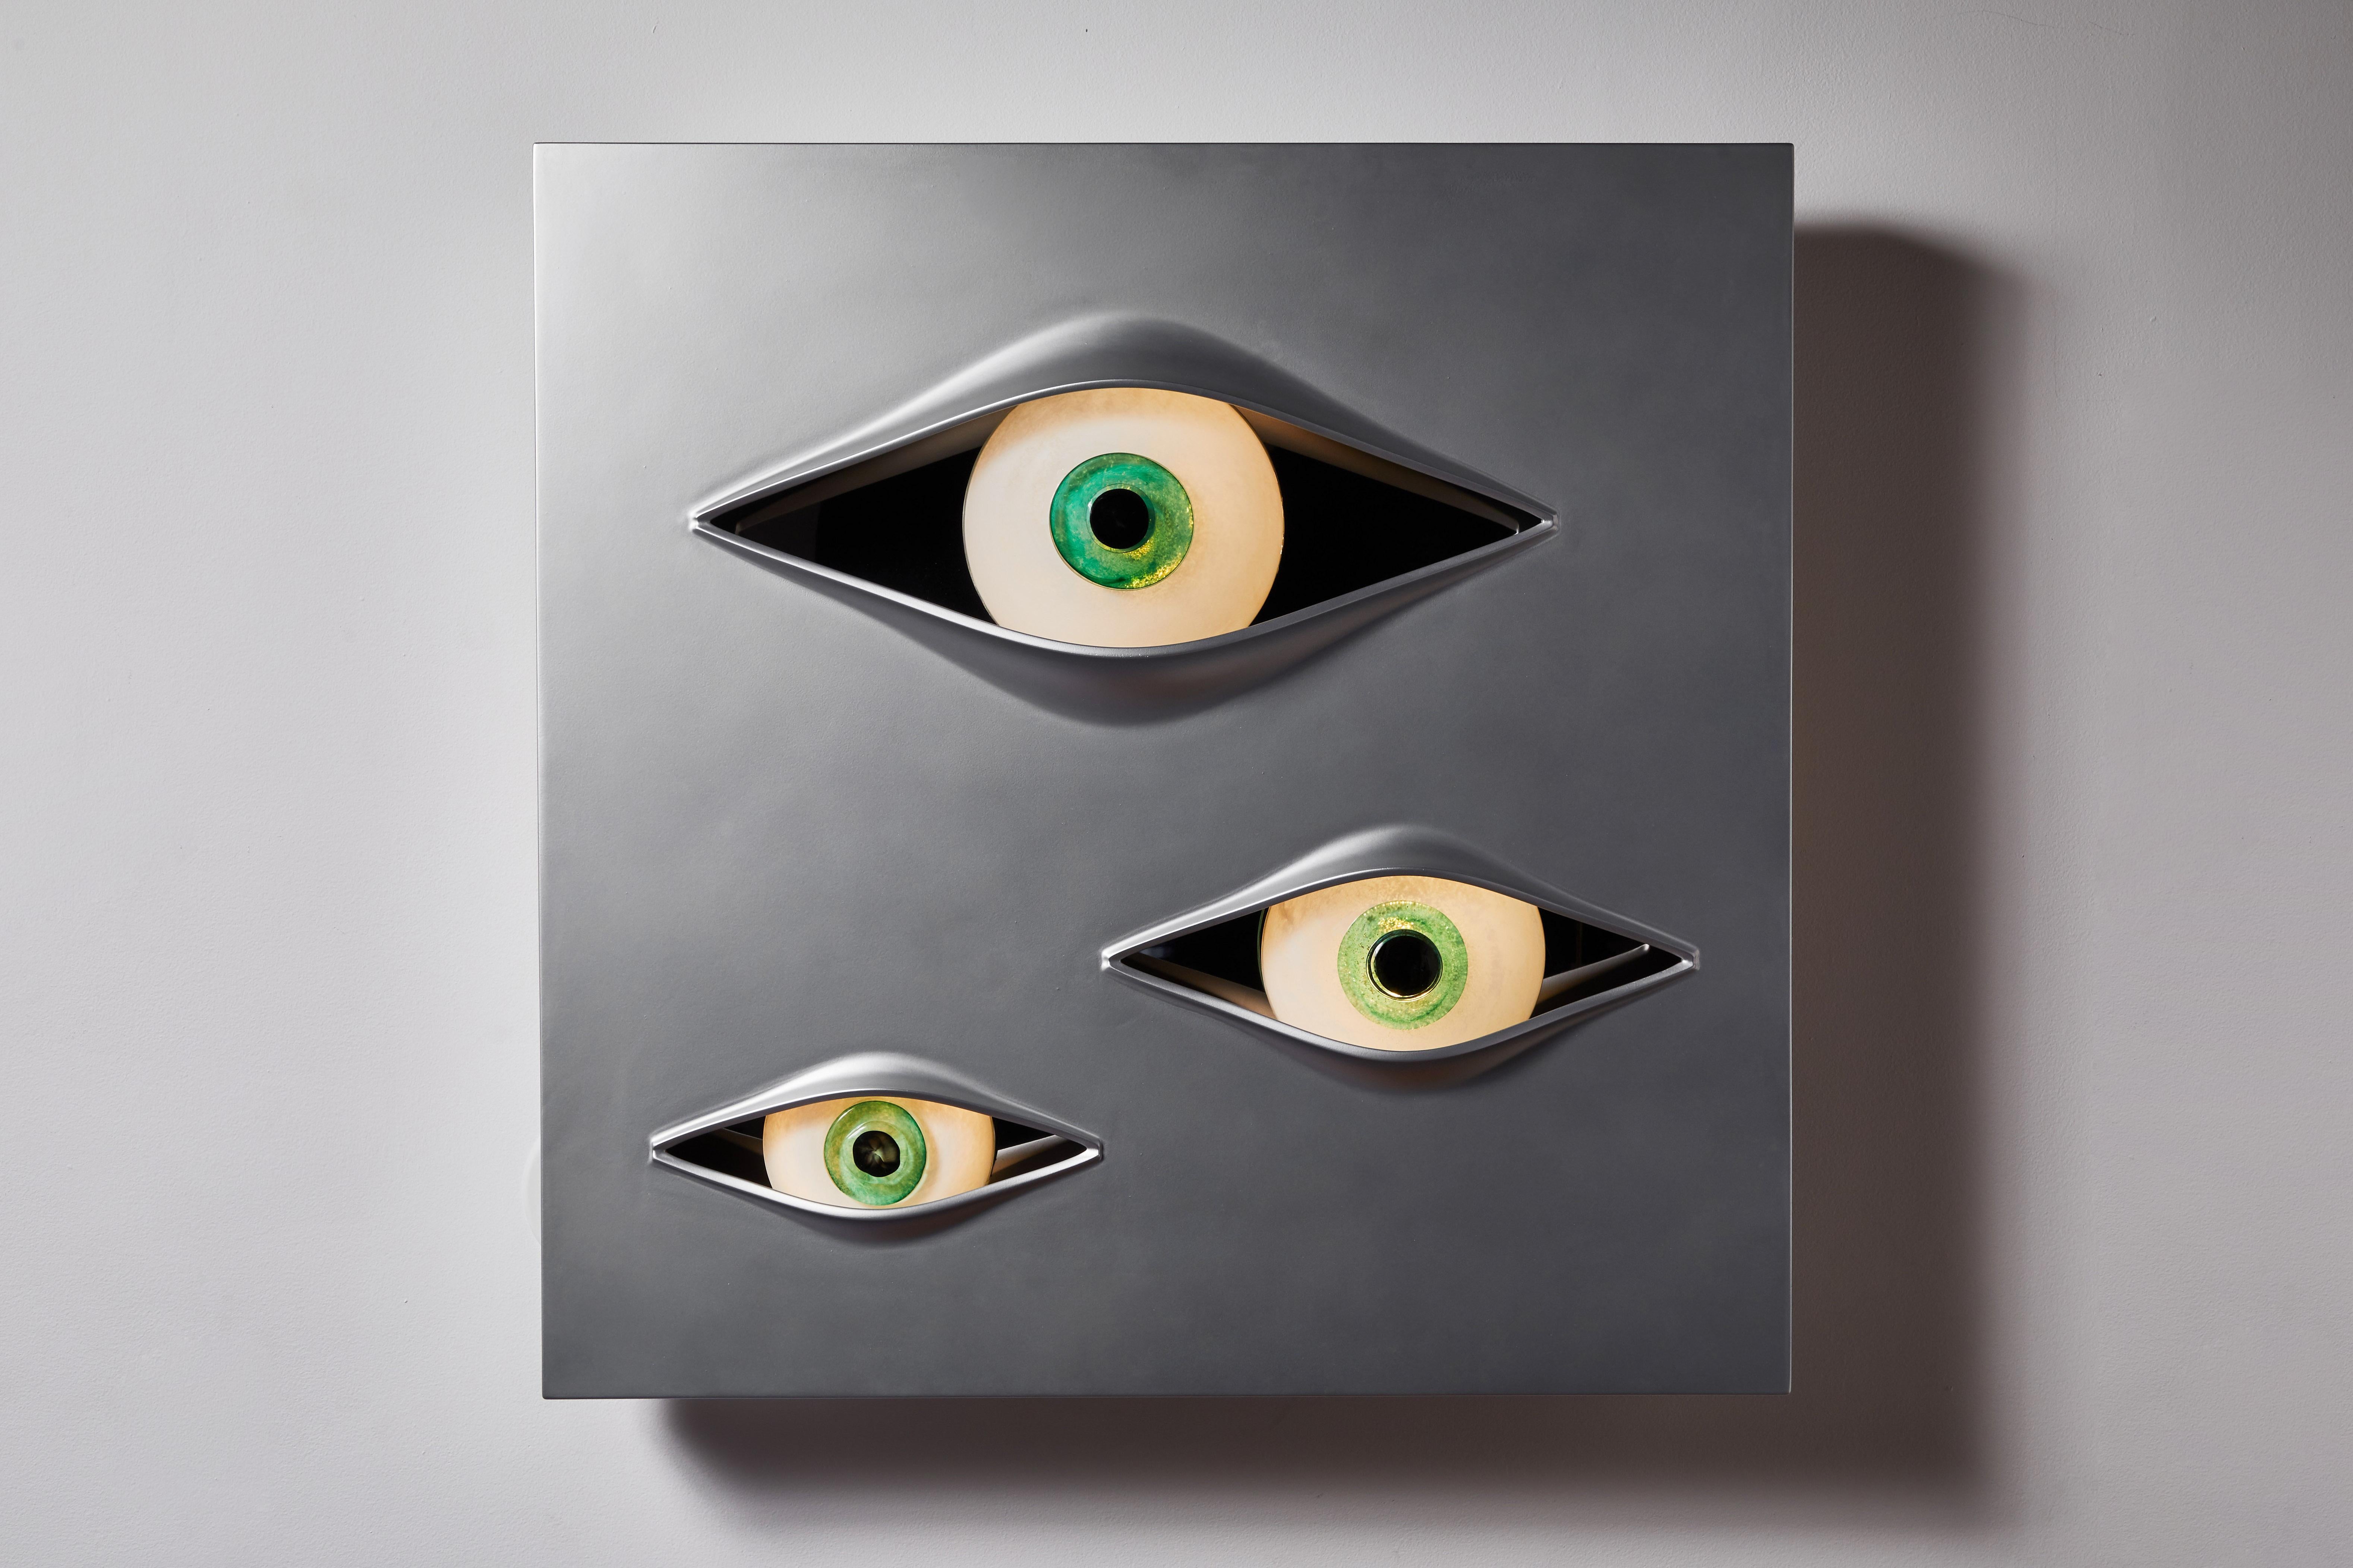 Malizia wall light by Angelo Brotto. Originally designed in 1973. Current production manufactured in Italy by Esperia. Luminous wall sculpture made with a panel of brushed aluminum and three eyes made of Murano glass. Takes three 11w LED bulbs.